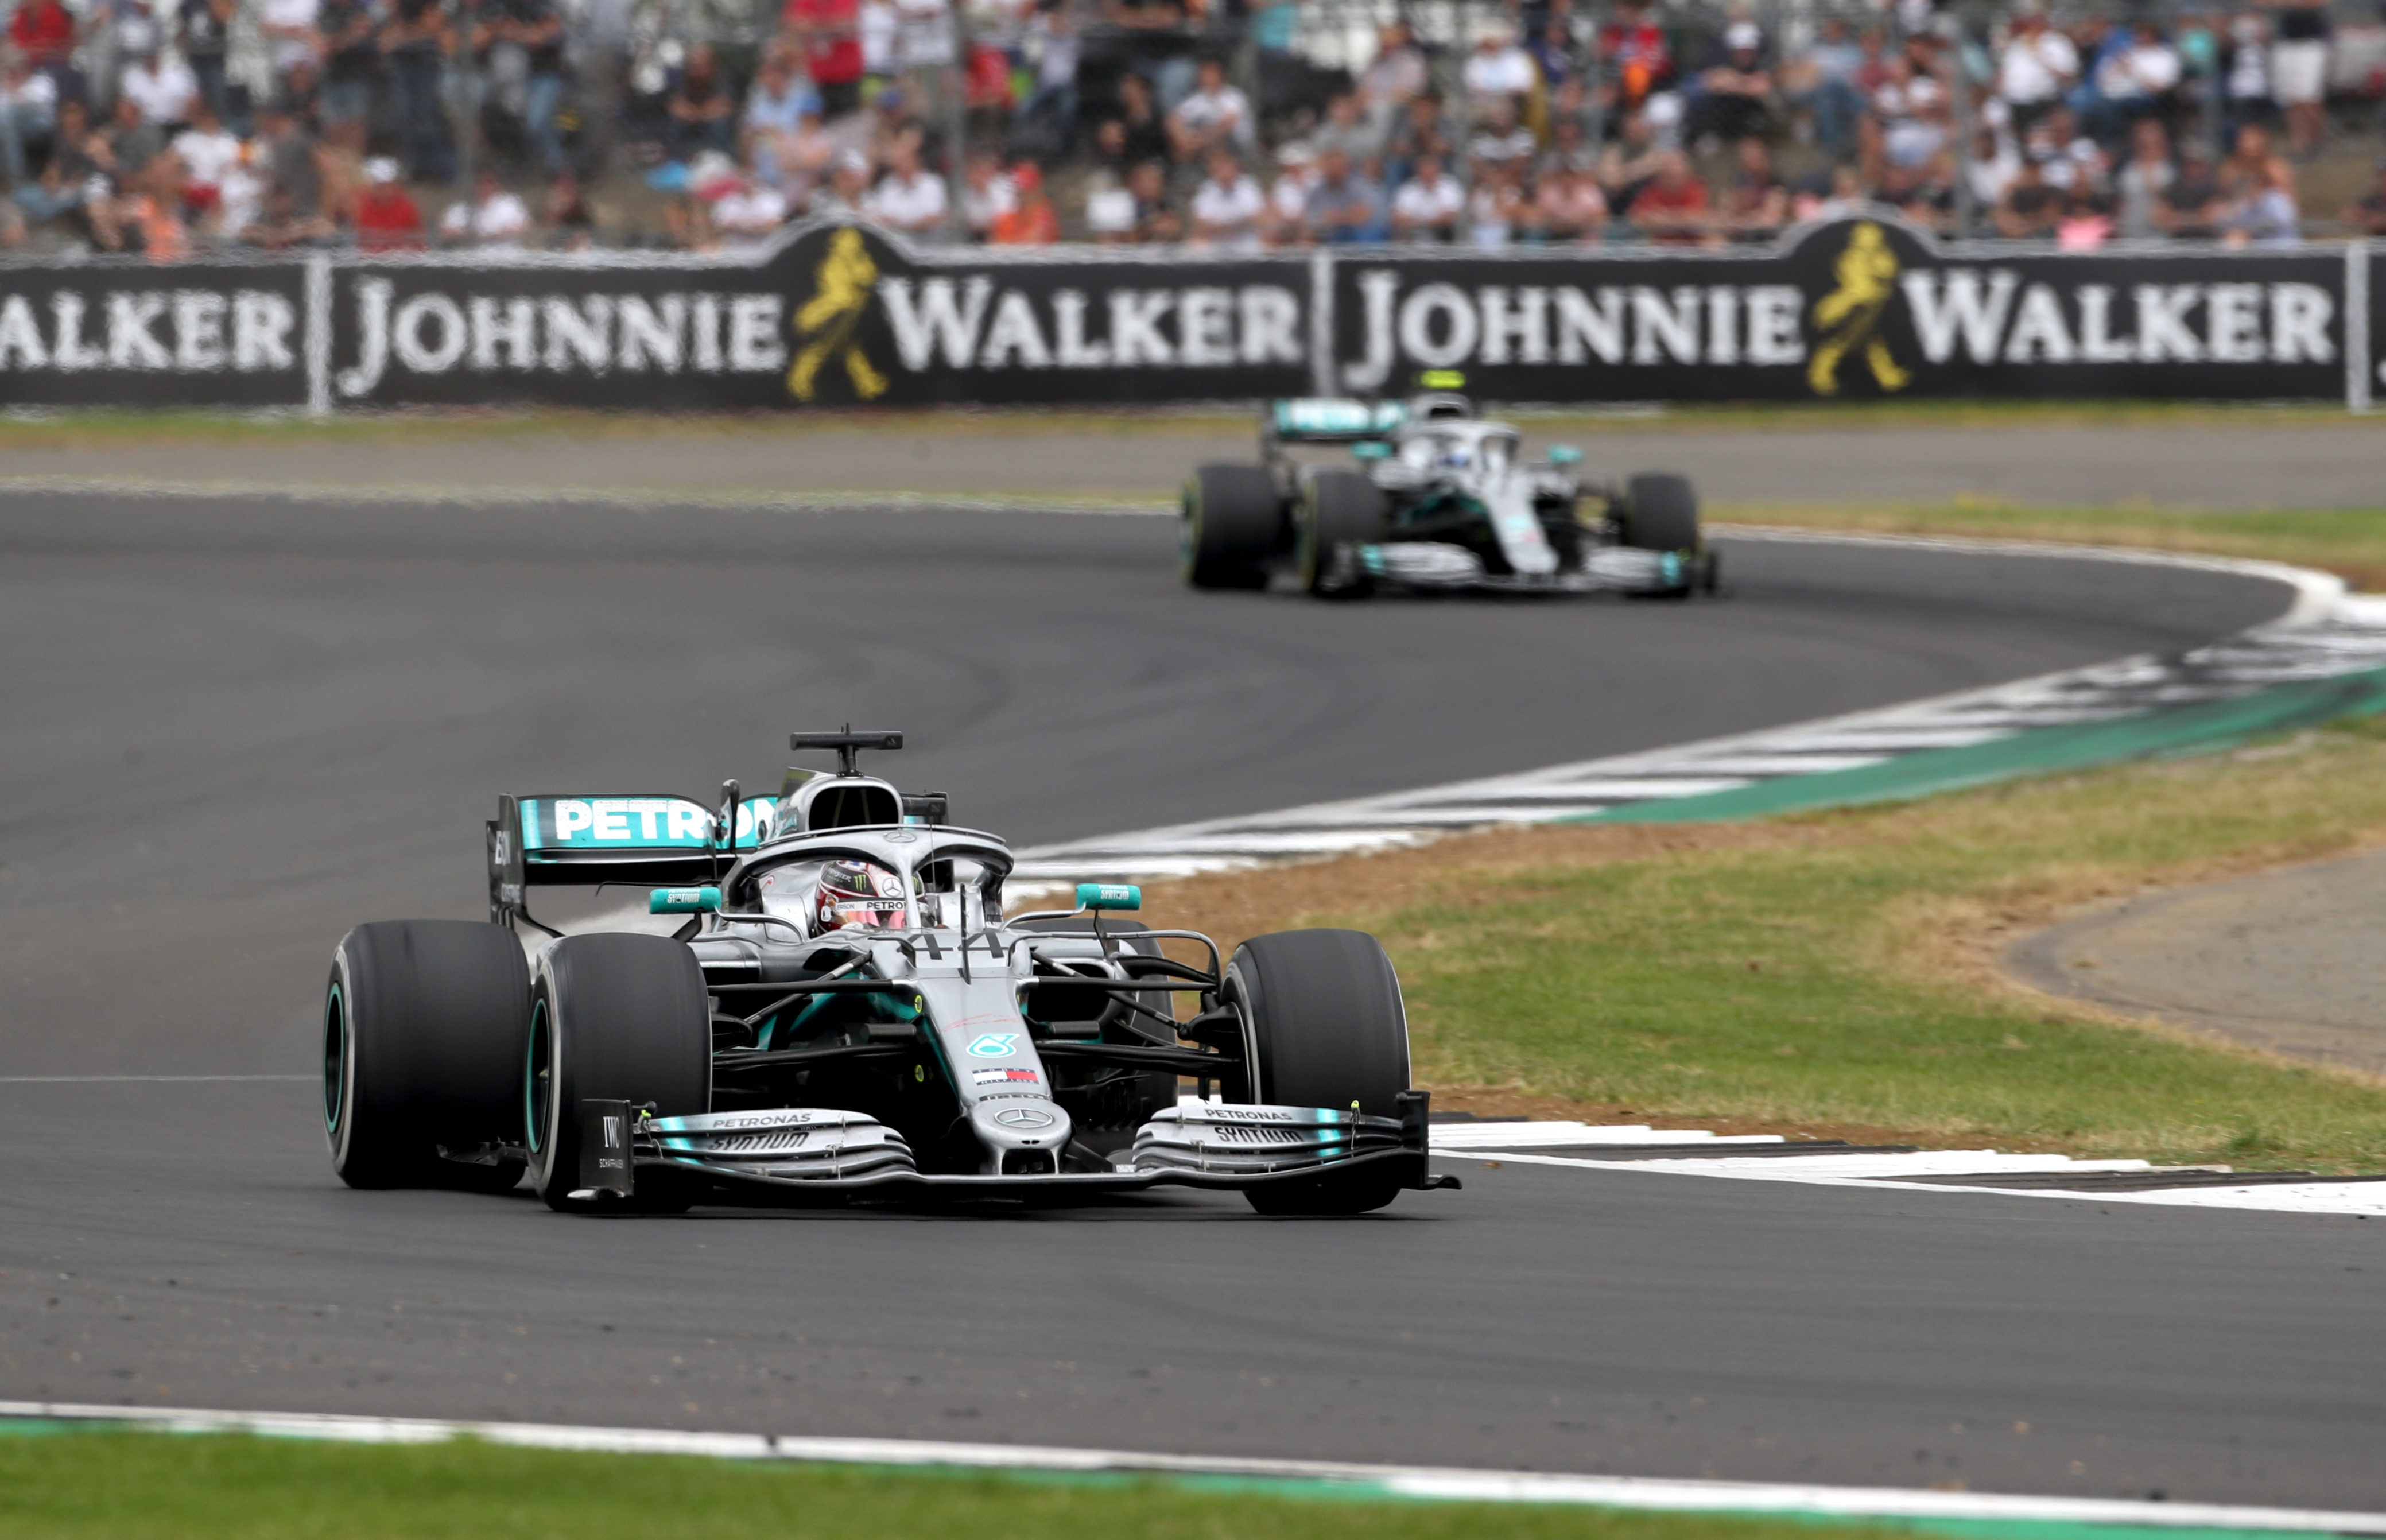 Mercedes' Lewis Hamilton leads the race during the British Grand Prix at Silverstone, Towcester. (Bradley Collyer/PA Wire)